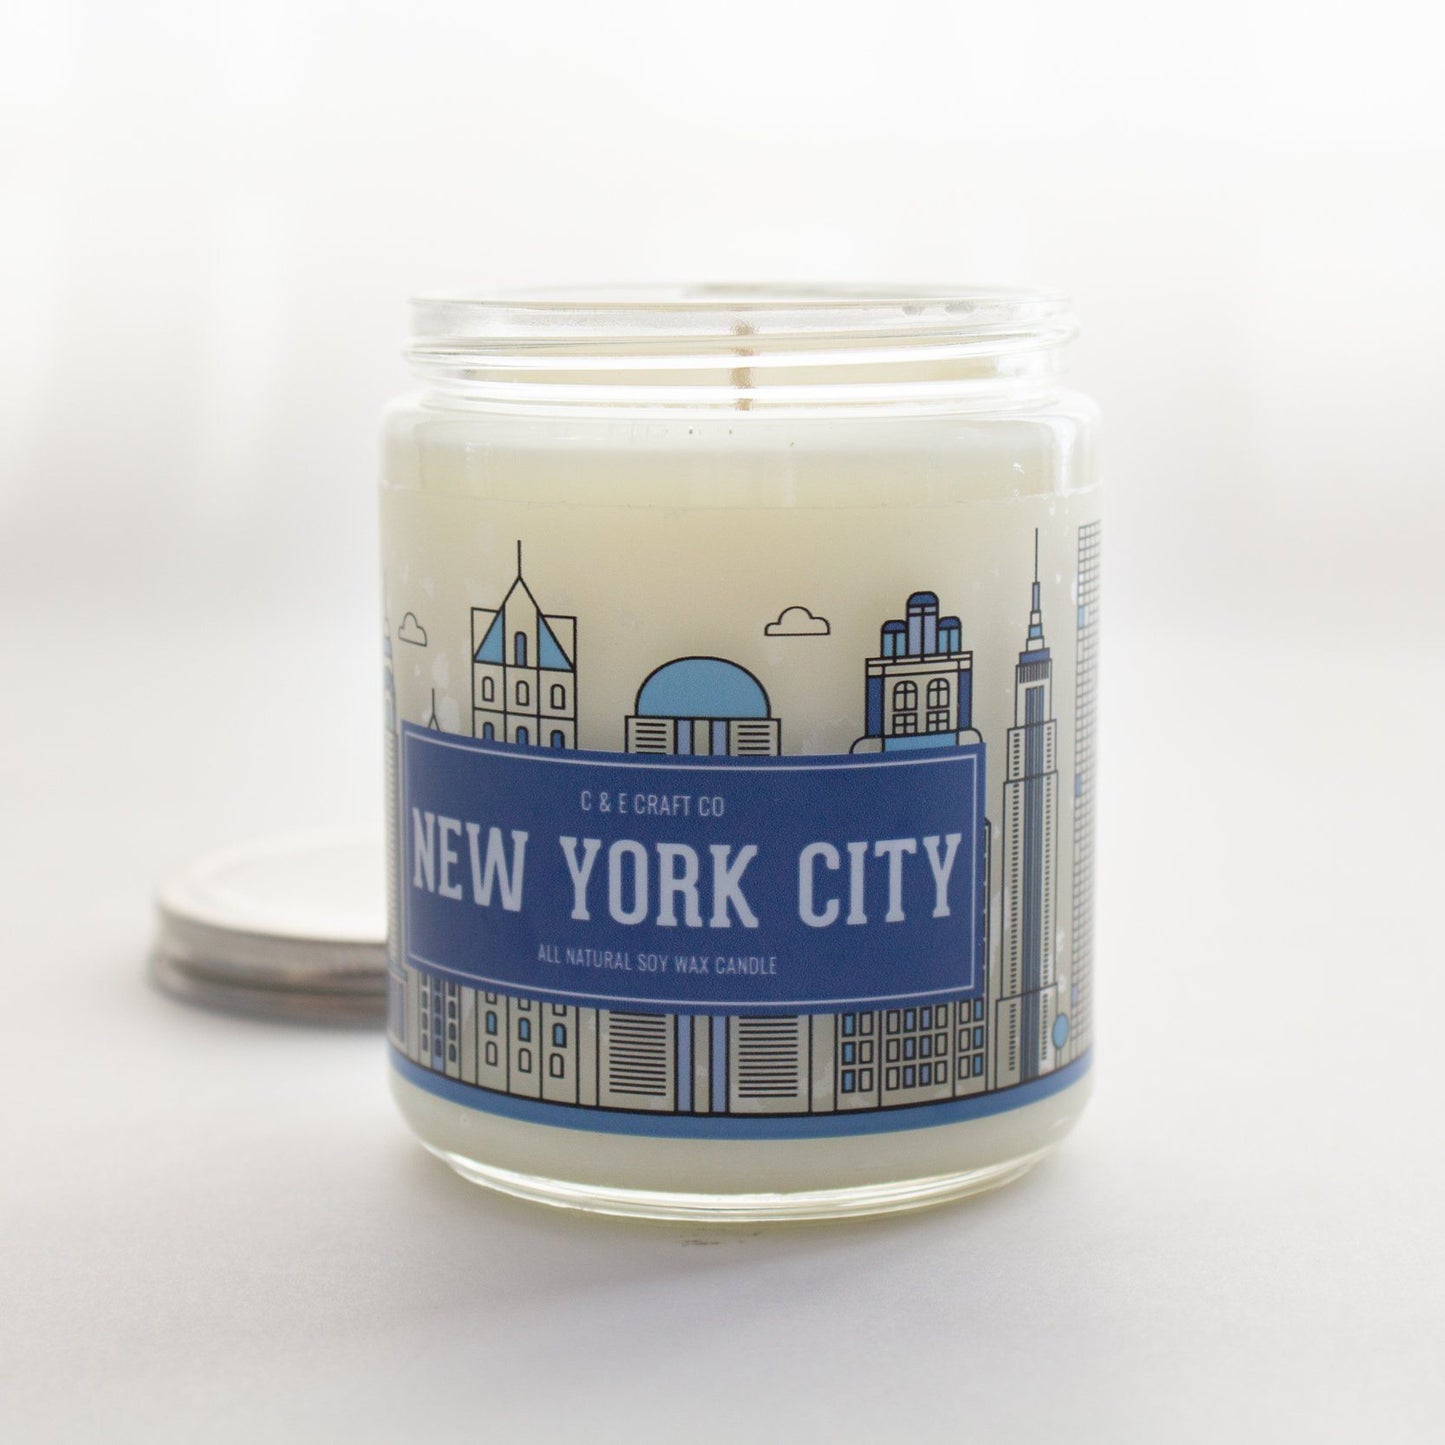 C&E - New York City Skyline - Soy Wax Candle - New York City Gift C & E Craft Co 